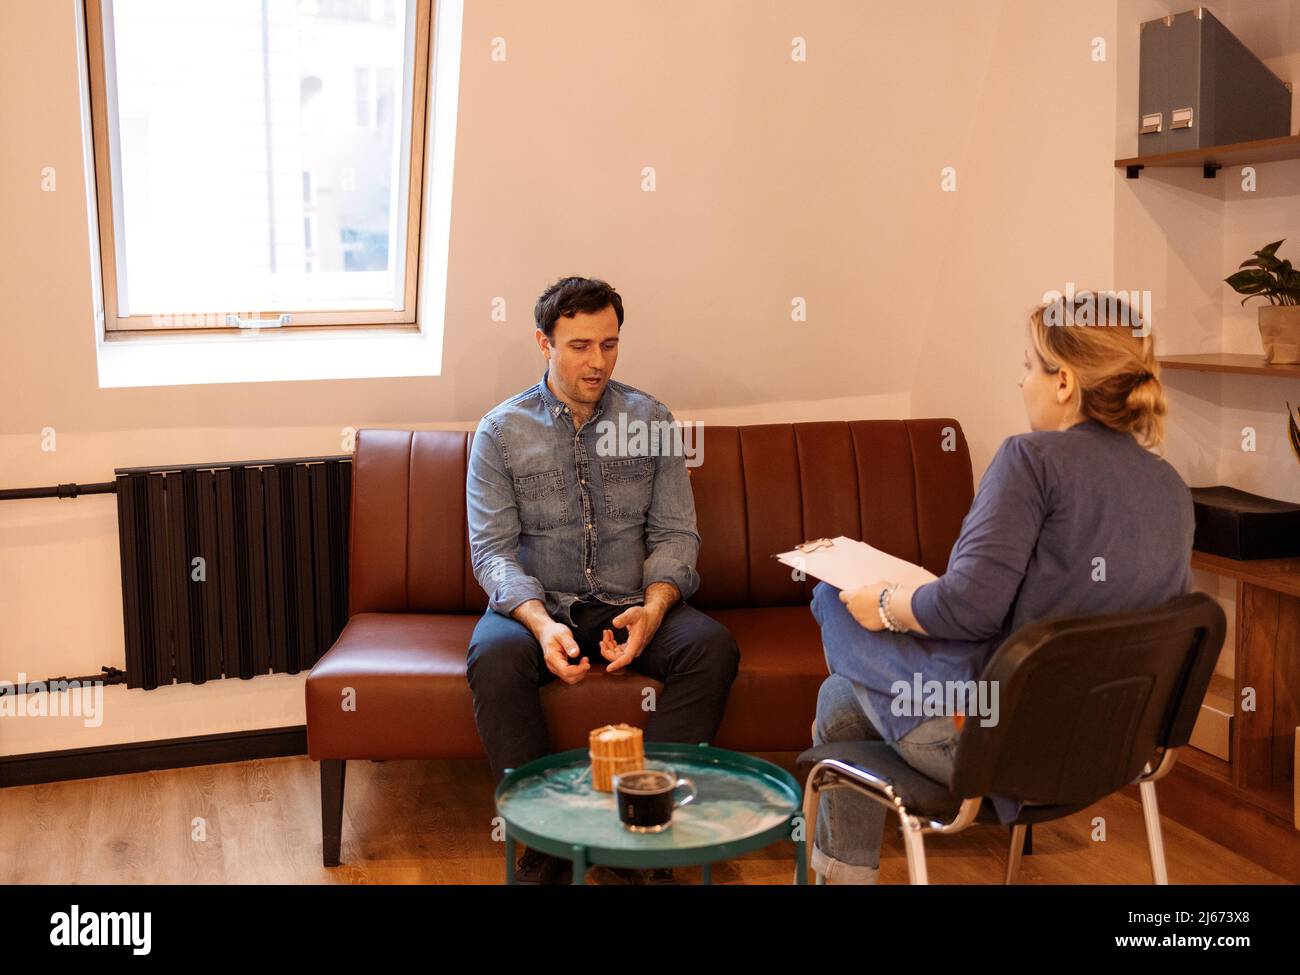 Psychotherapy. Nice serious pleasant man visiting a psychologist and having a psychological session while dealing with problems in relationships Stock Photo